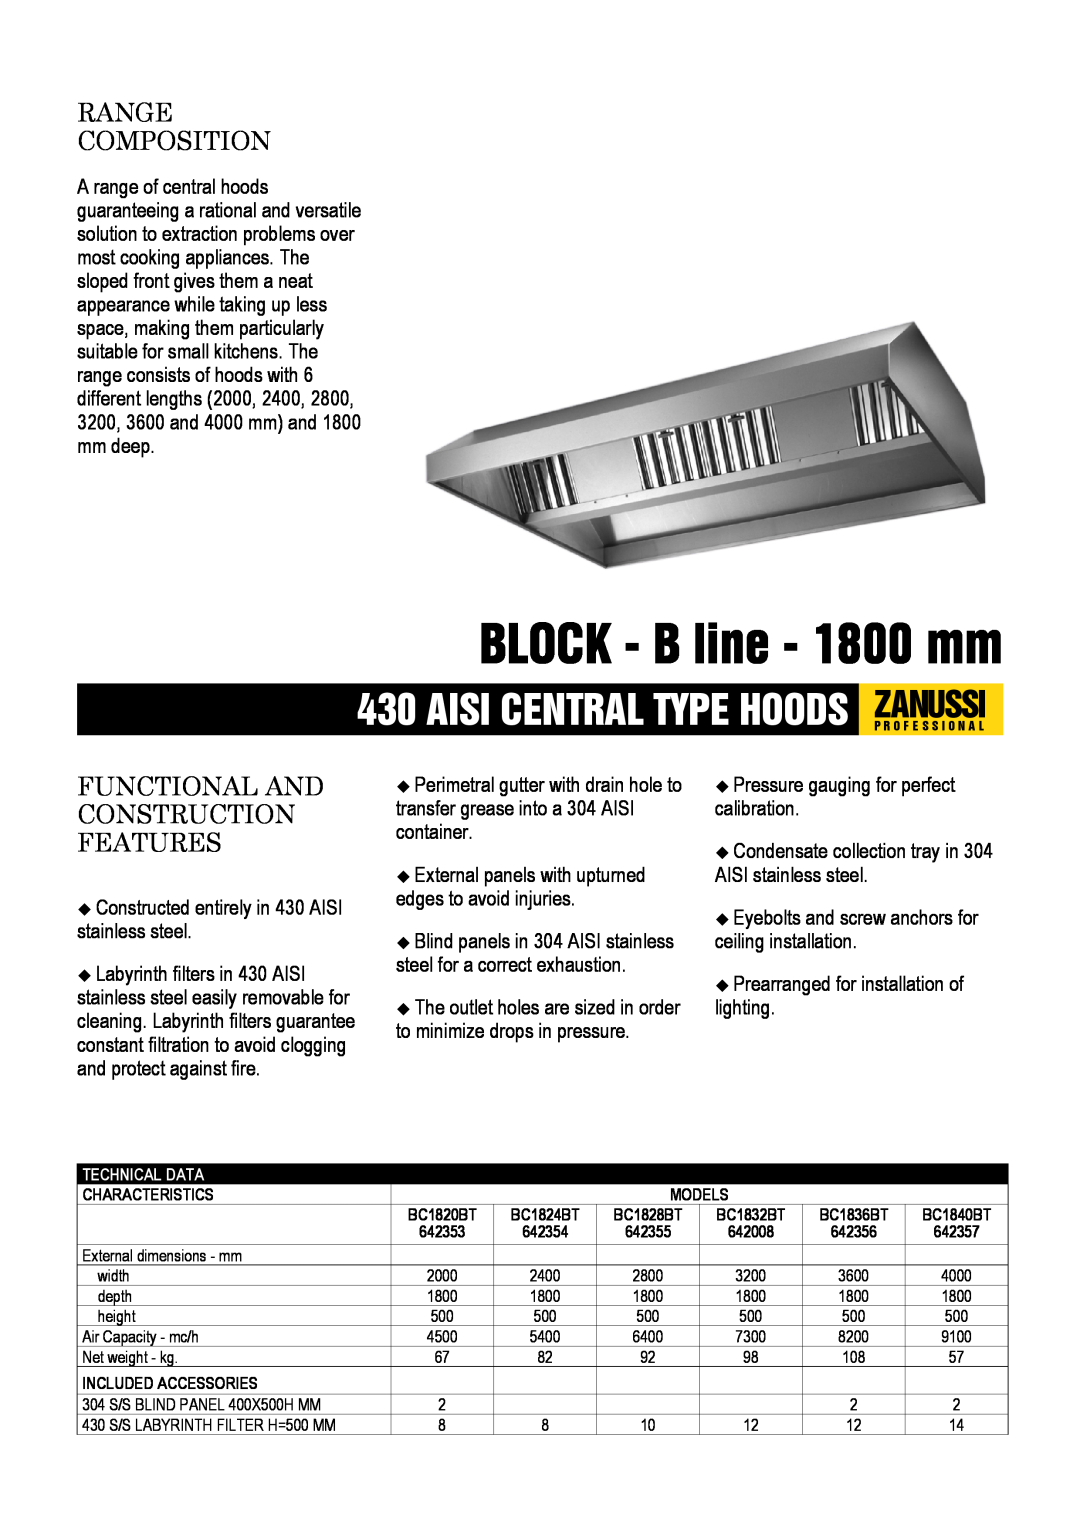 Zanussi BC1840BT, BC1836BT dimensions BLOCK - B line - 1800 mm, Range Composition, Functional And Construction Features 